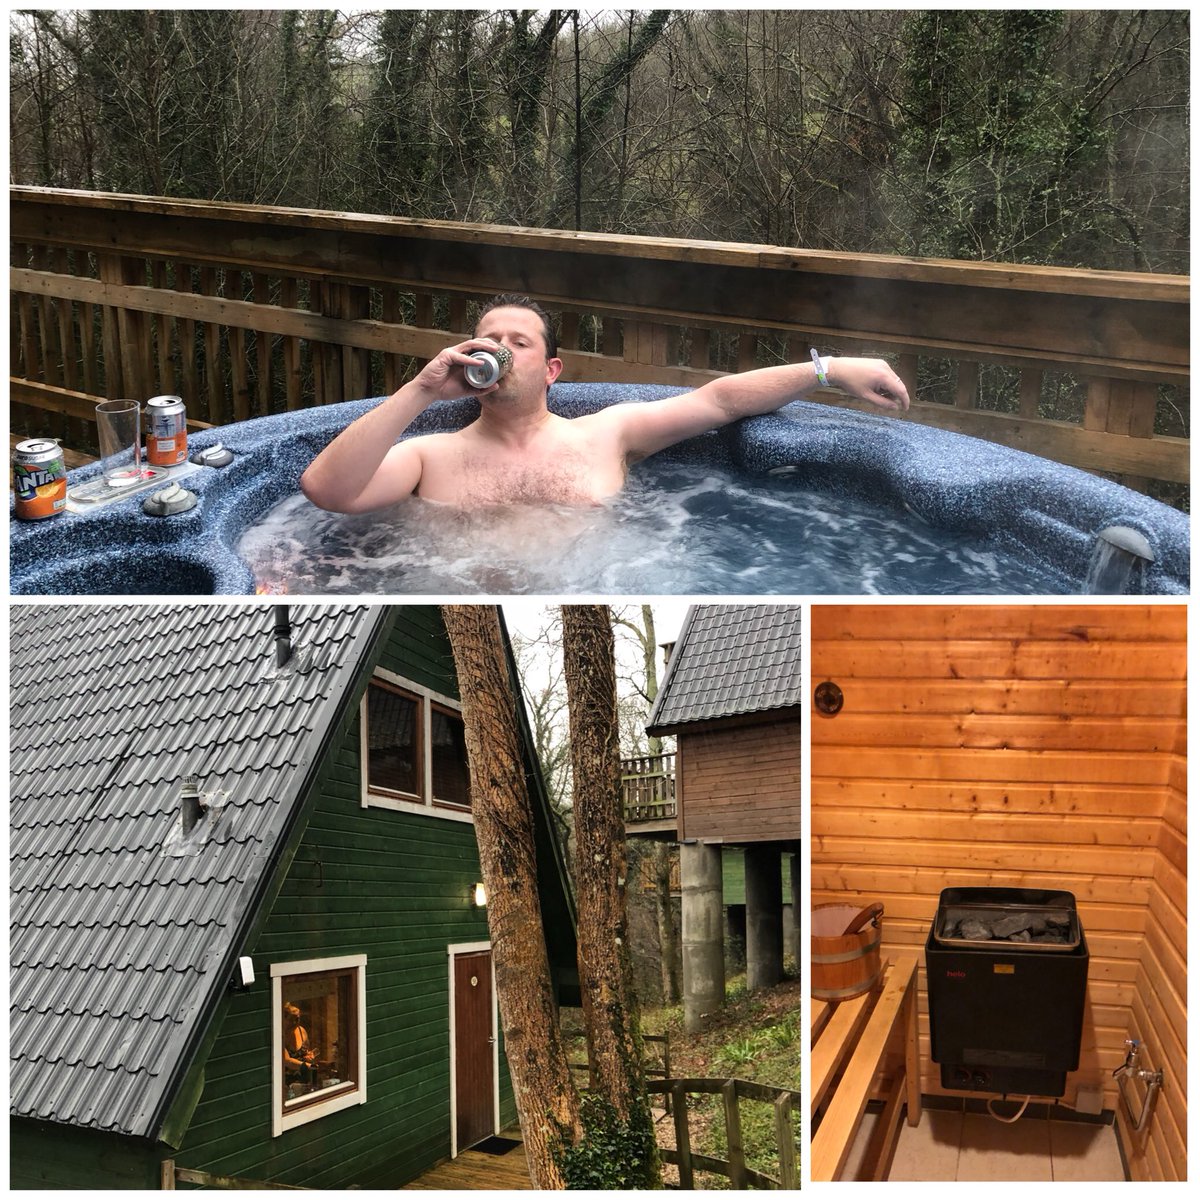 Weekend away...thank you #cans #ForestRetreat #HotTub